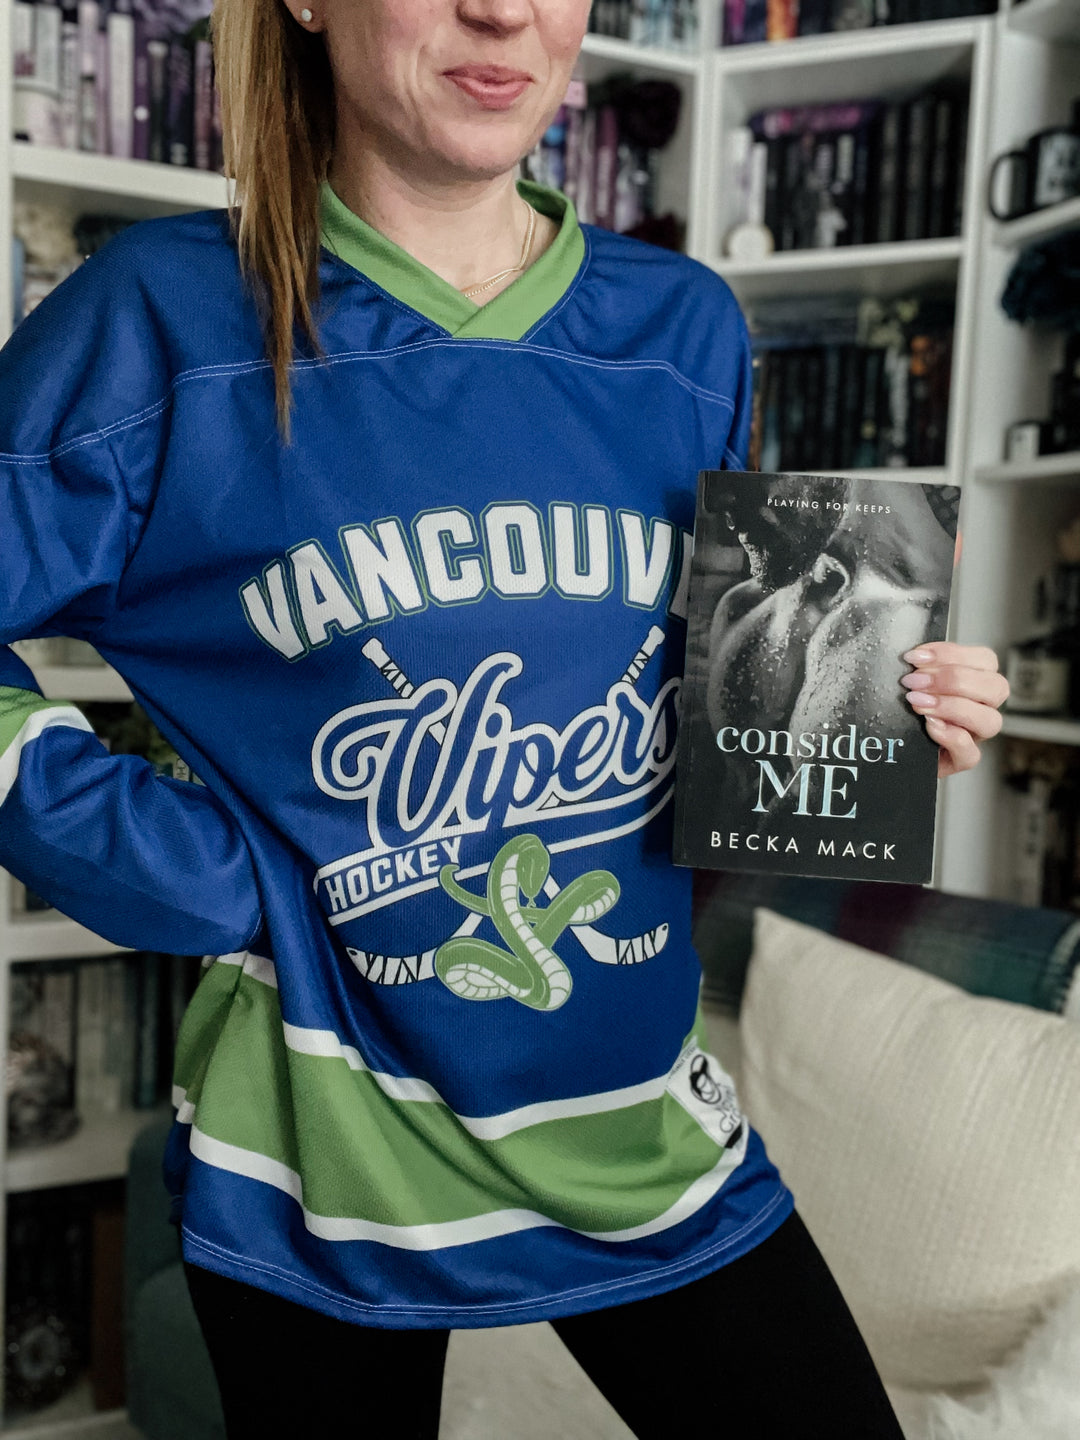 a woman in a hockey jersey holding a book